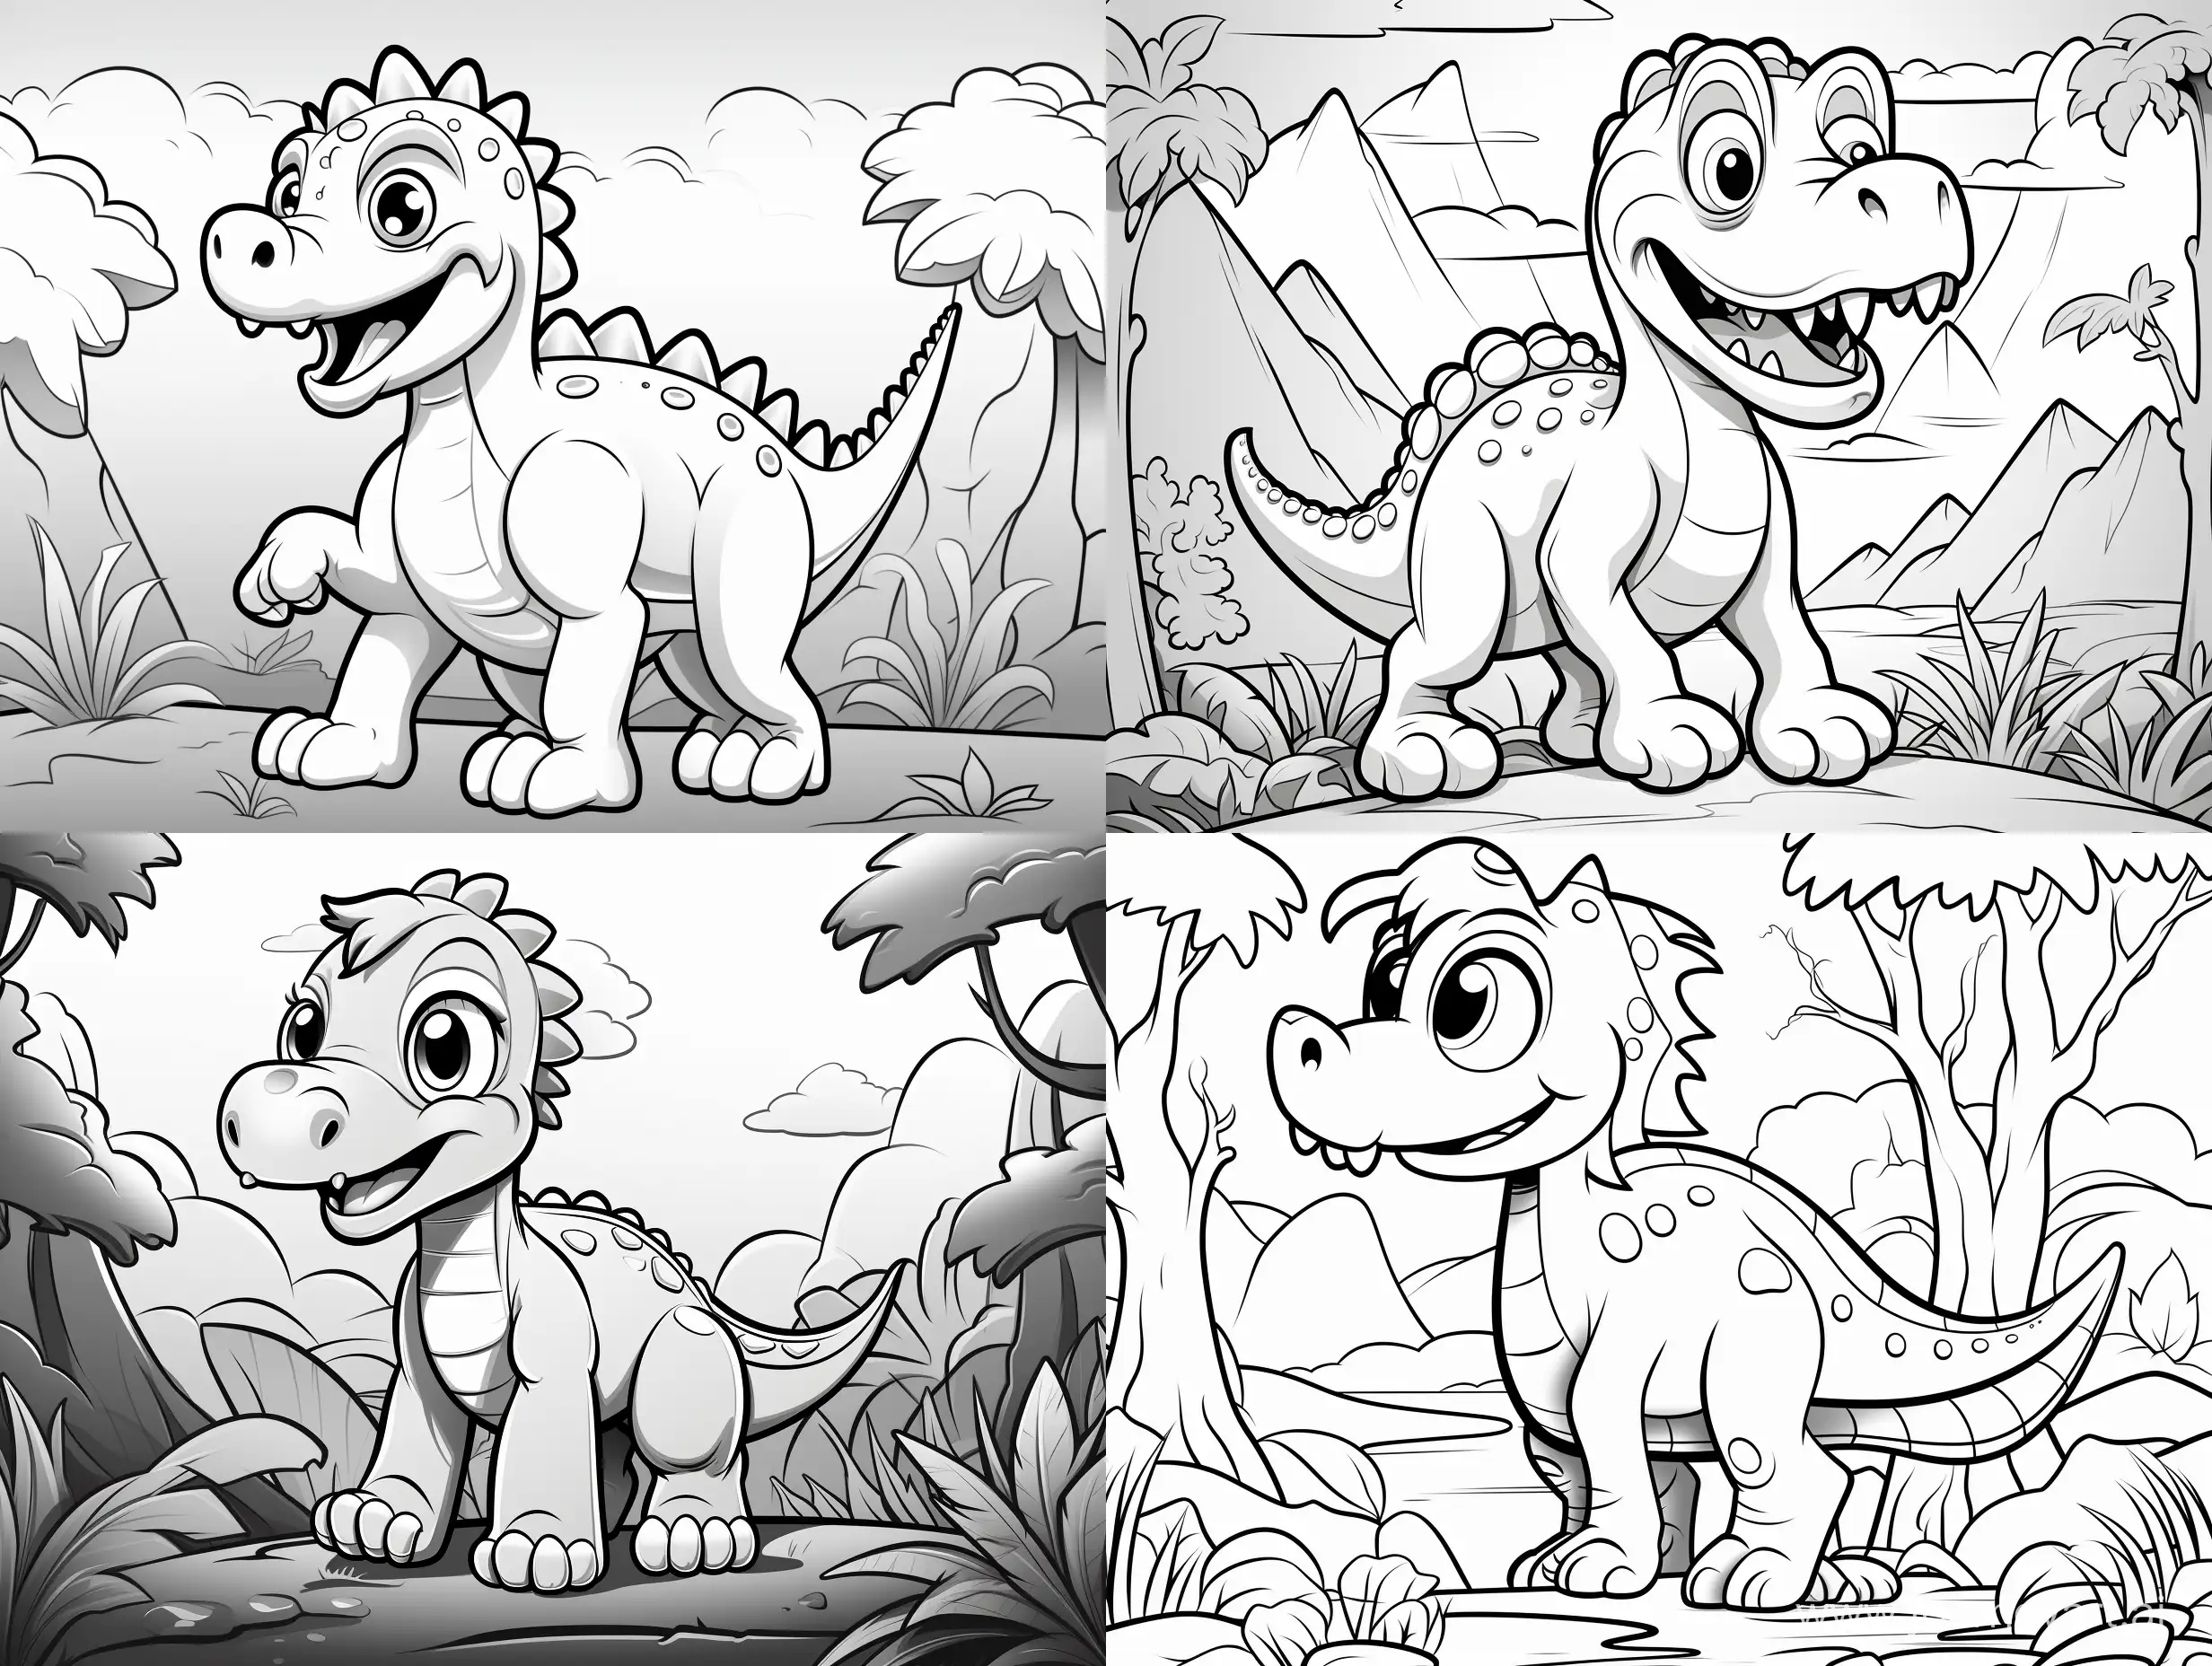 Cute-Dinosaur-Cartoon-Coloring-Page-for-Kids-Ages-14